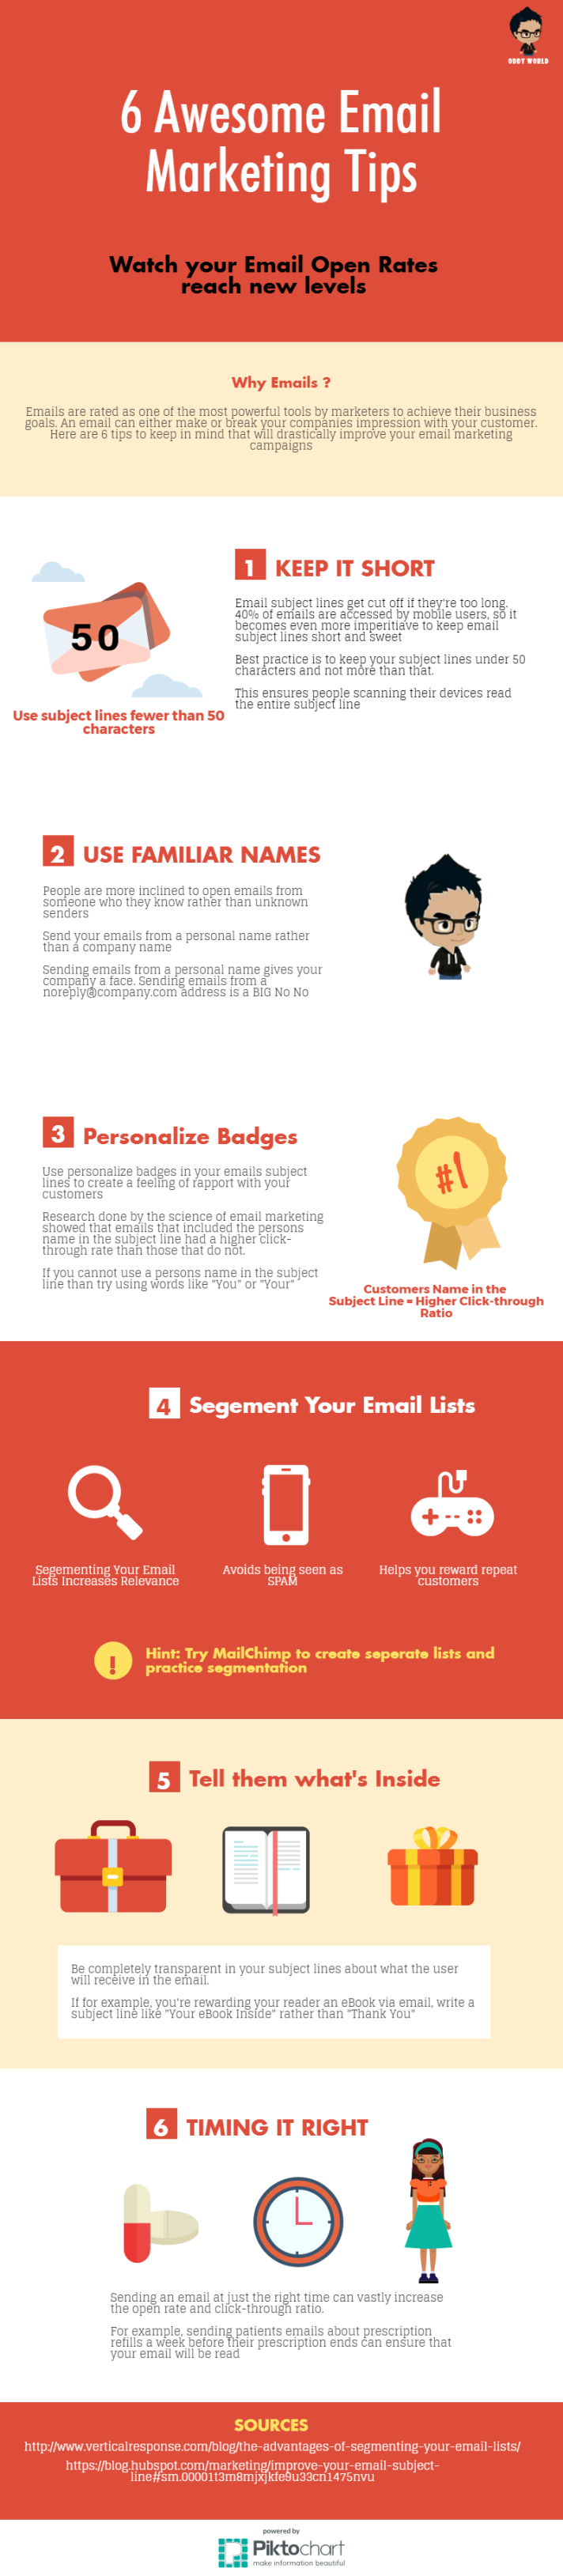 6 awesome email marketing tips infographic